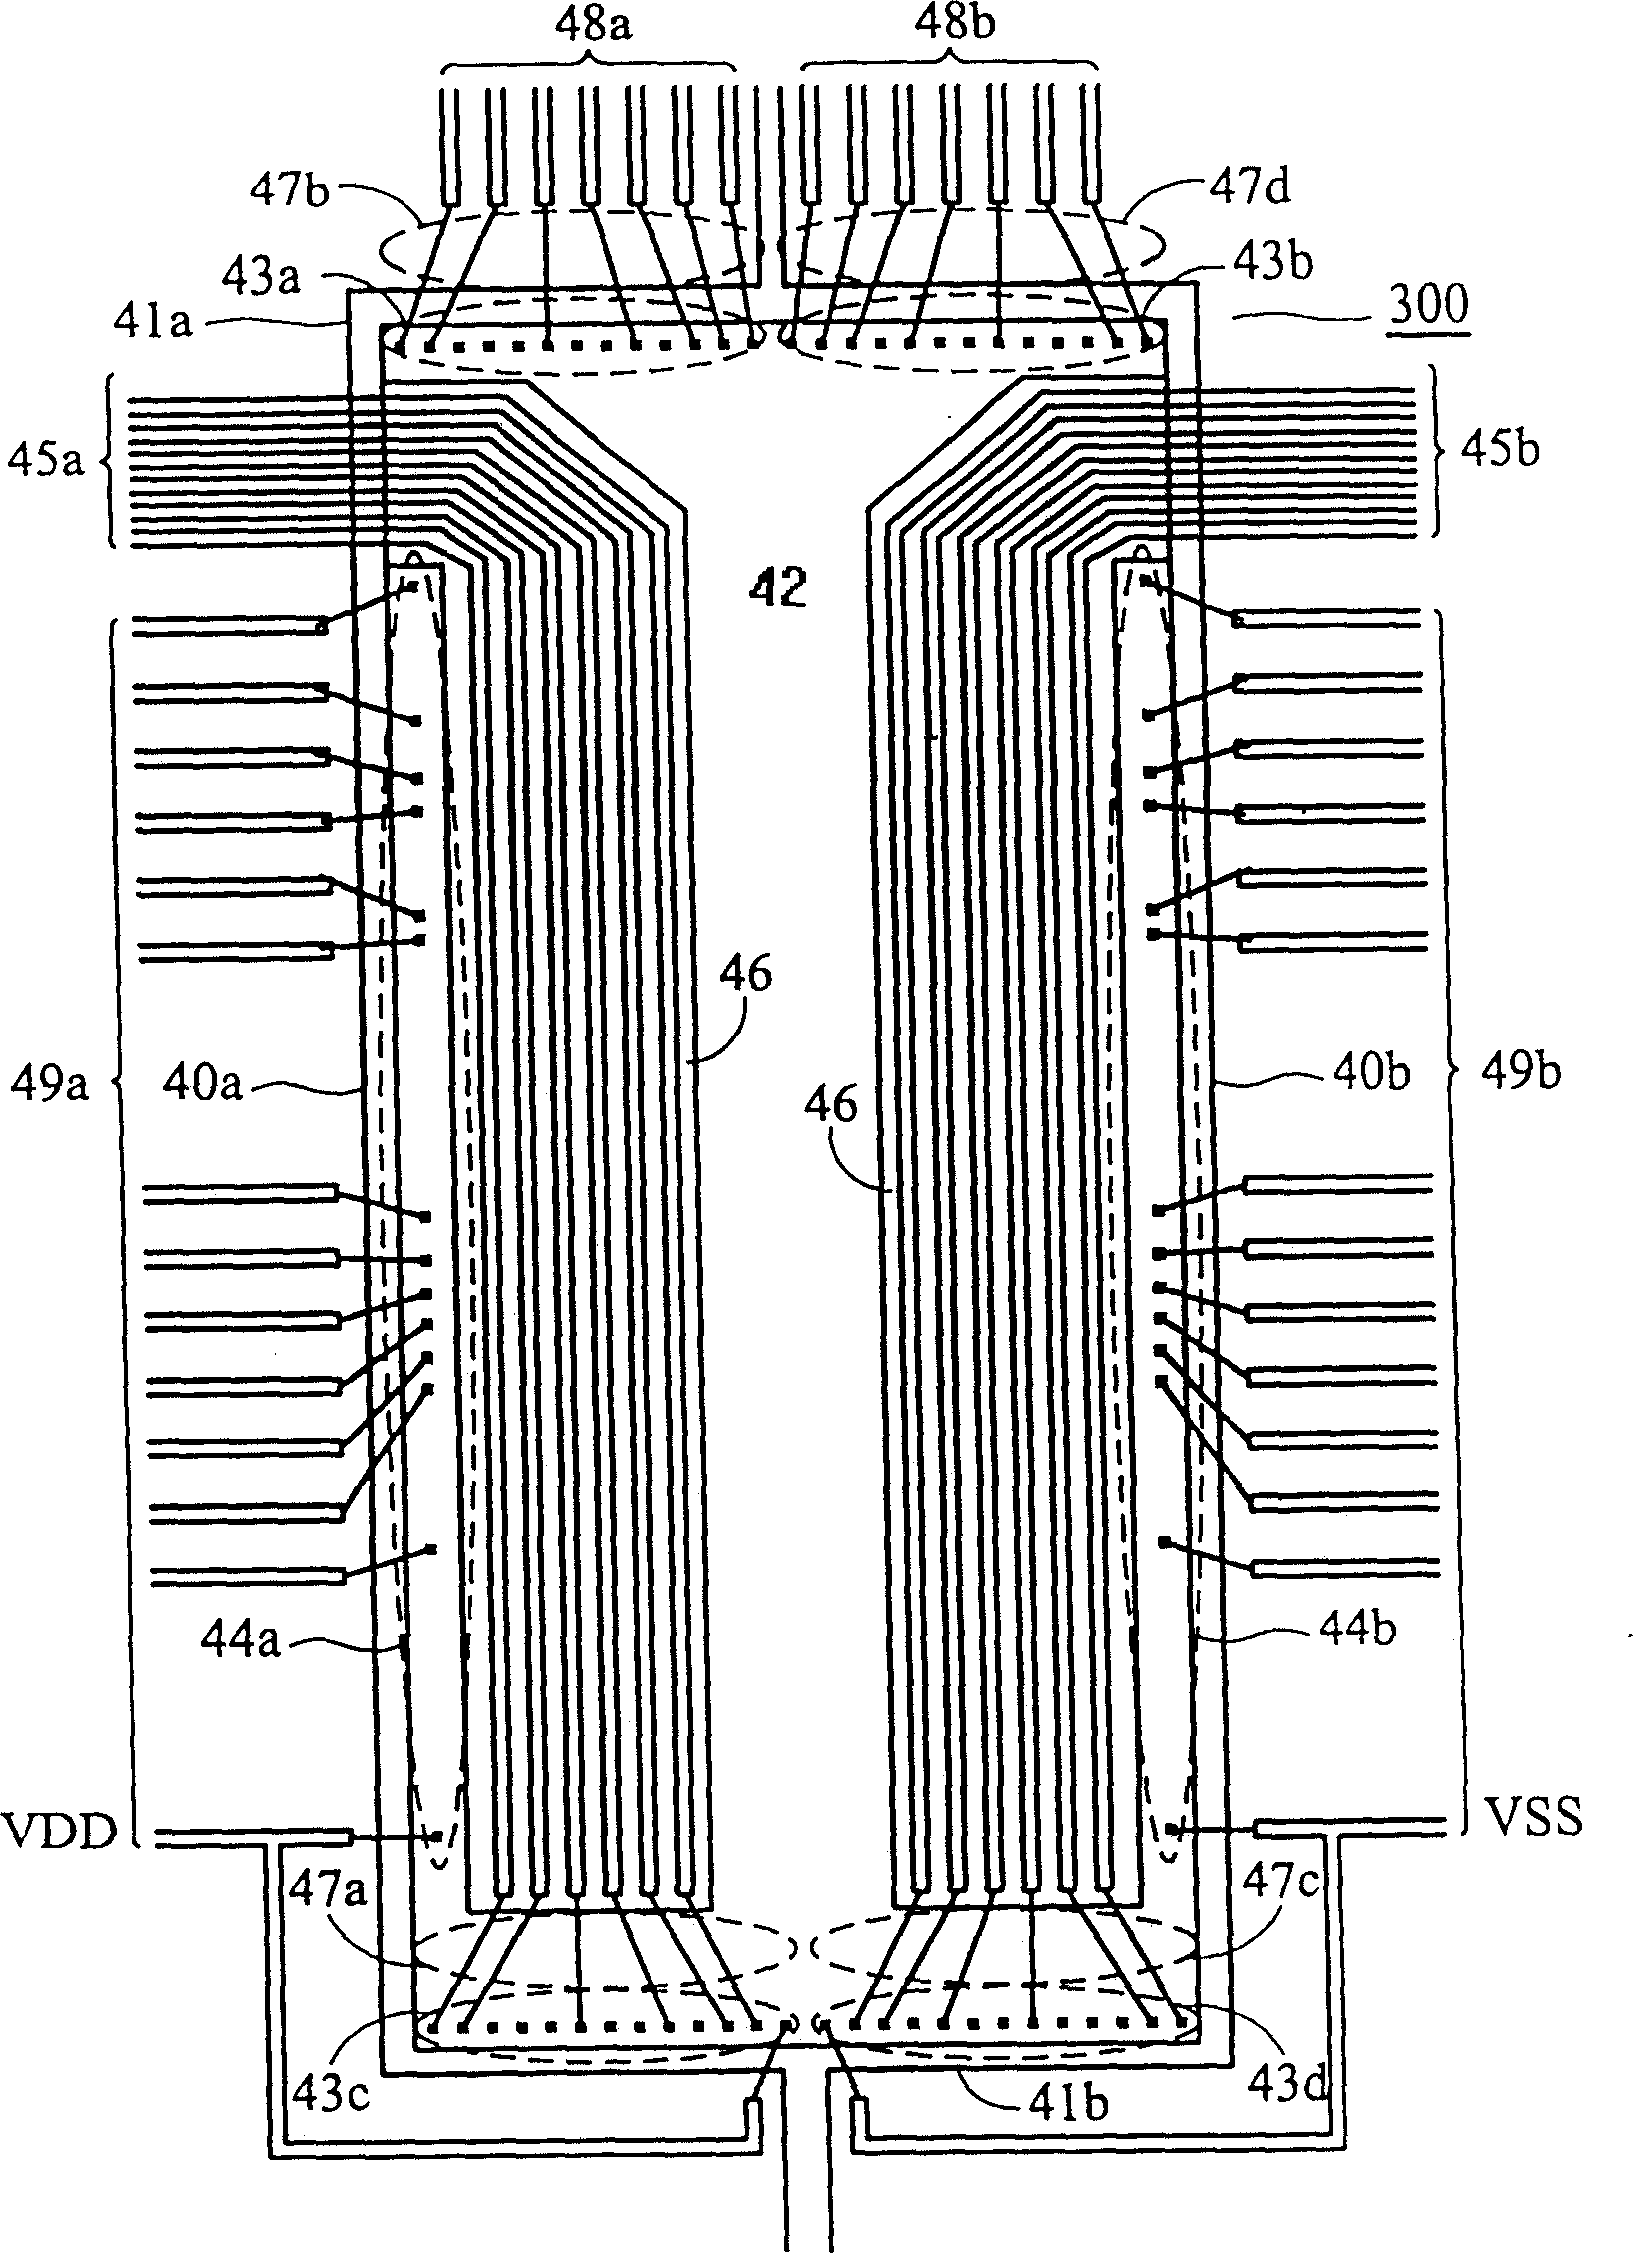 Capsulation body of semiconductor ship